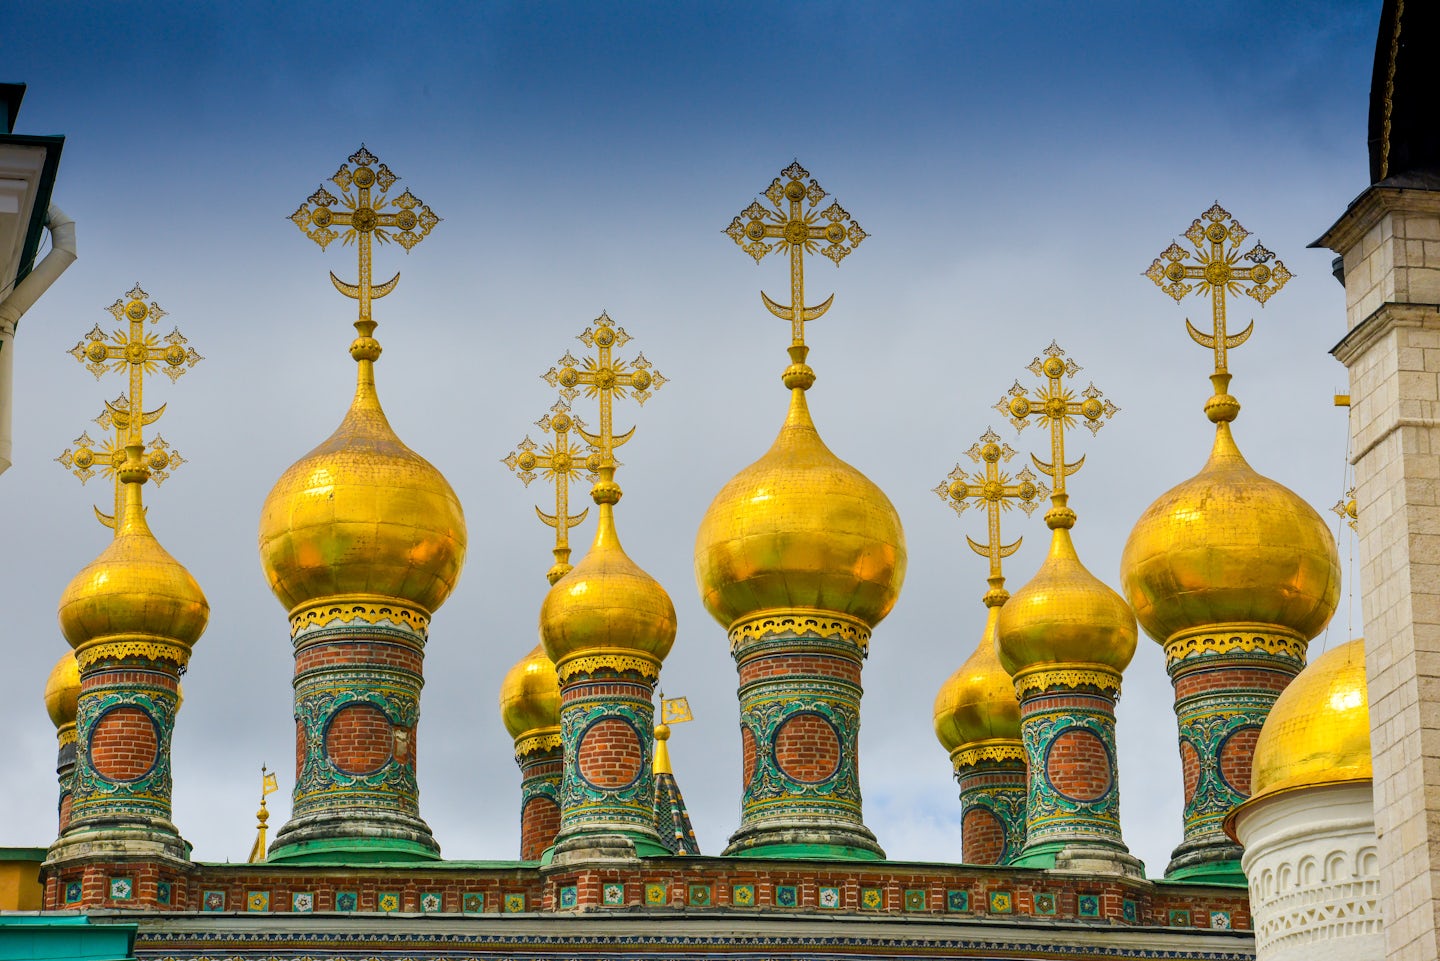 The spires of one of the churches inside the Kremlin in Moscow.